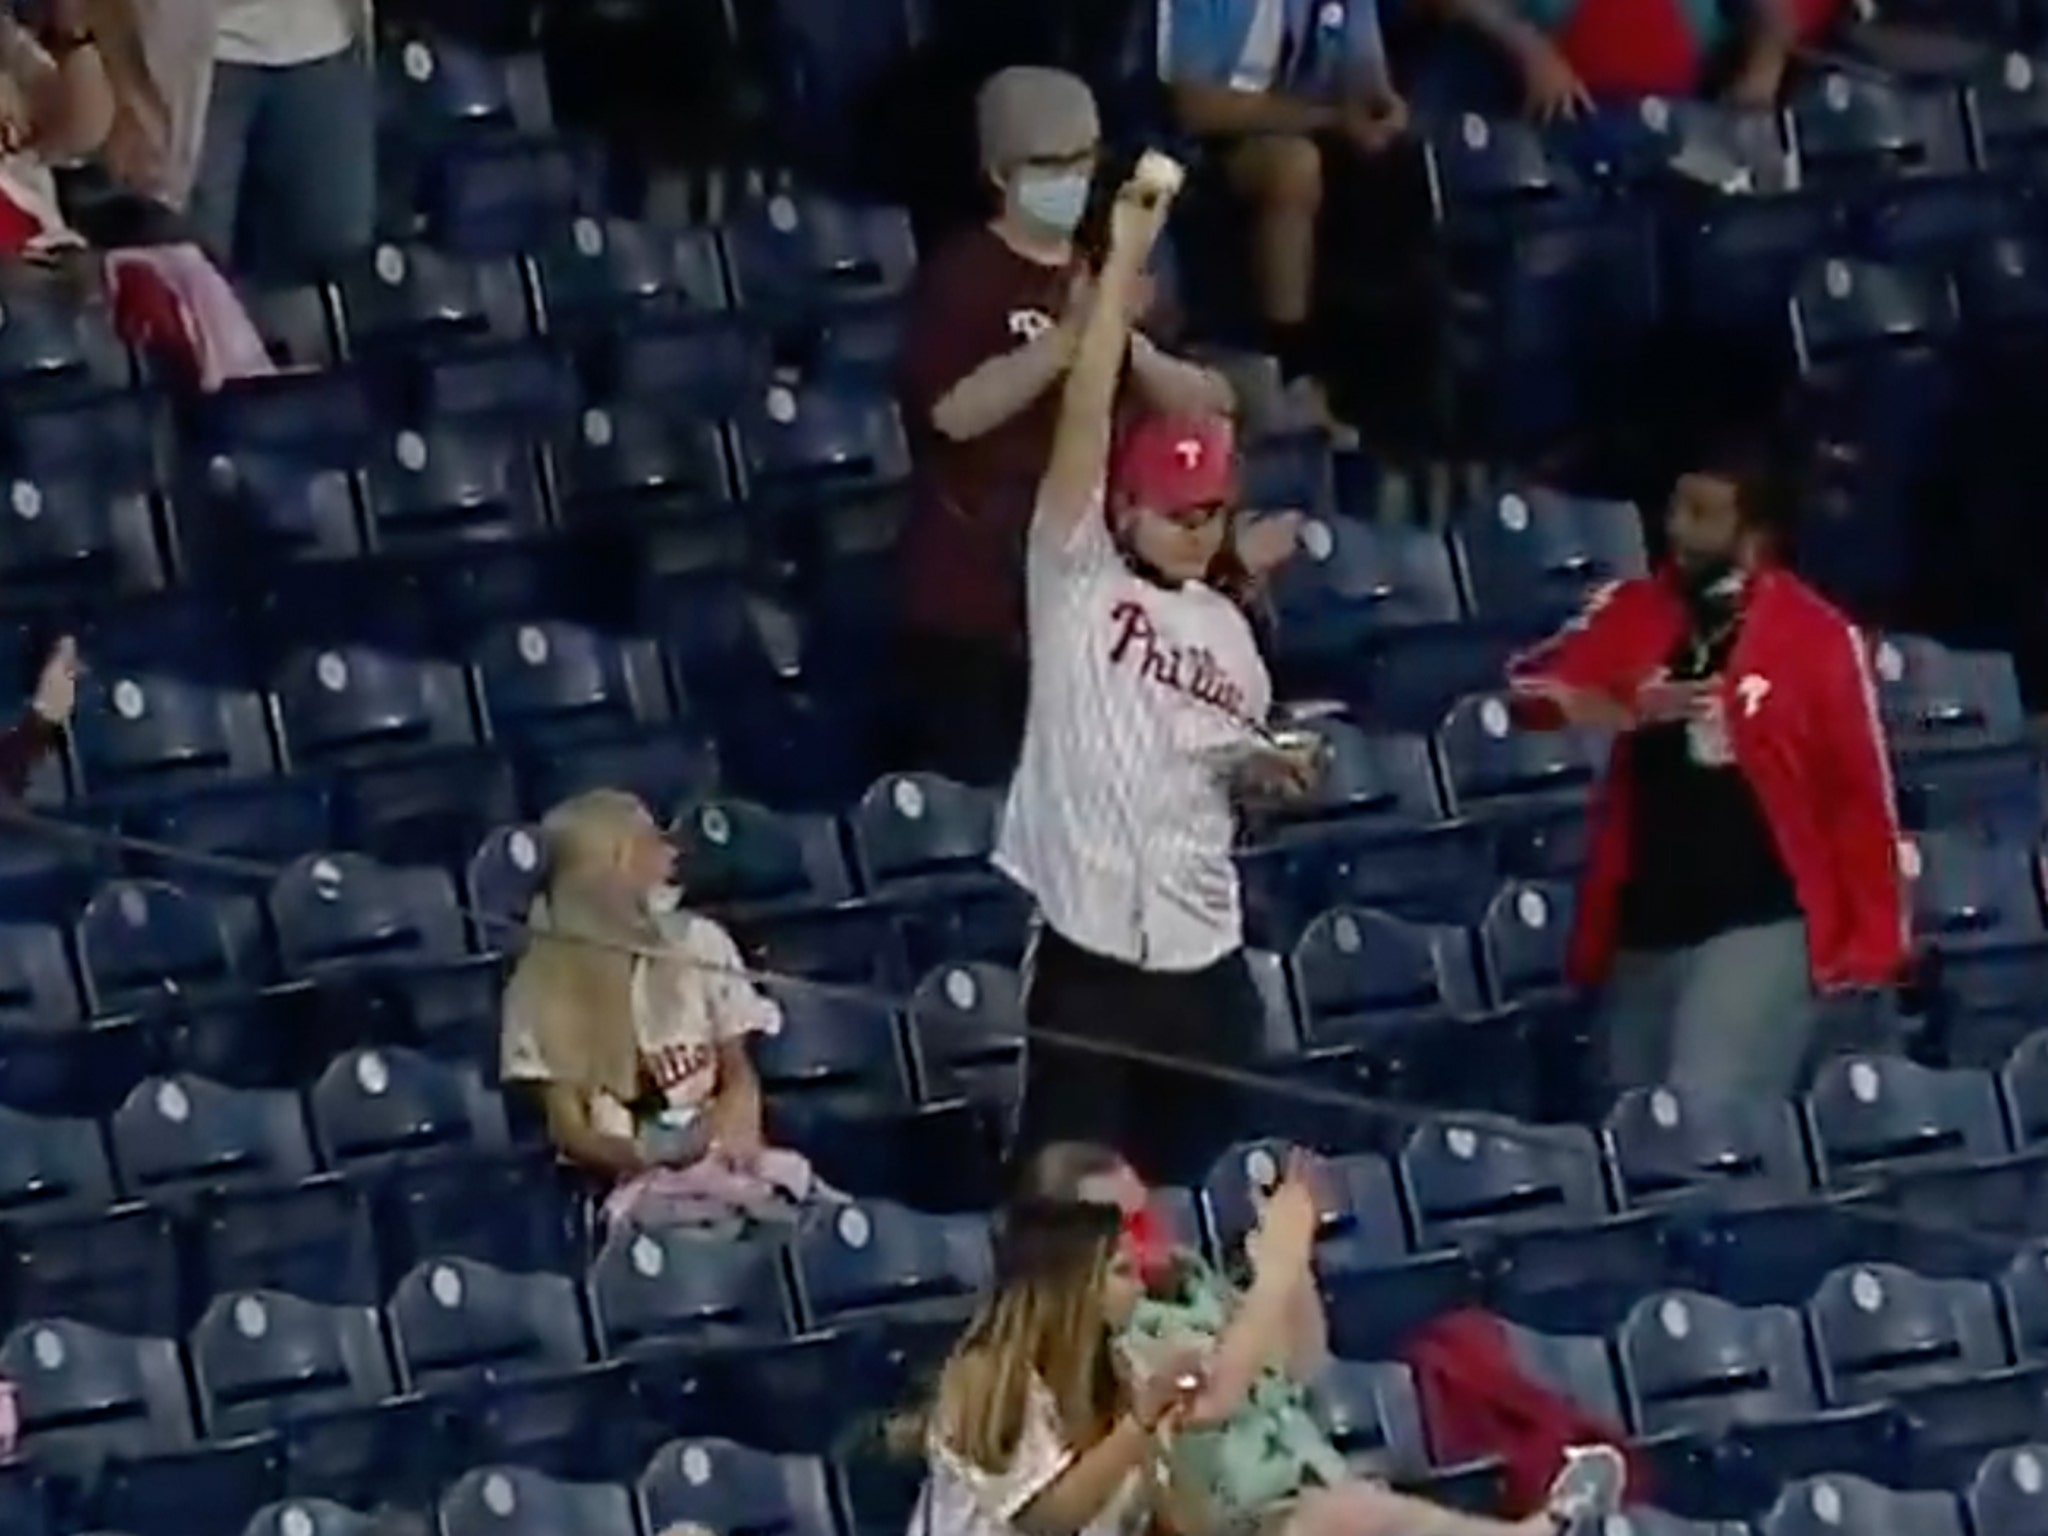 A frustrated young Phillies fan missed two foul balls, but the